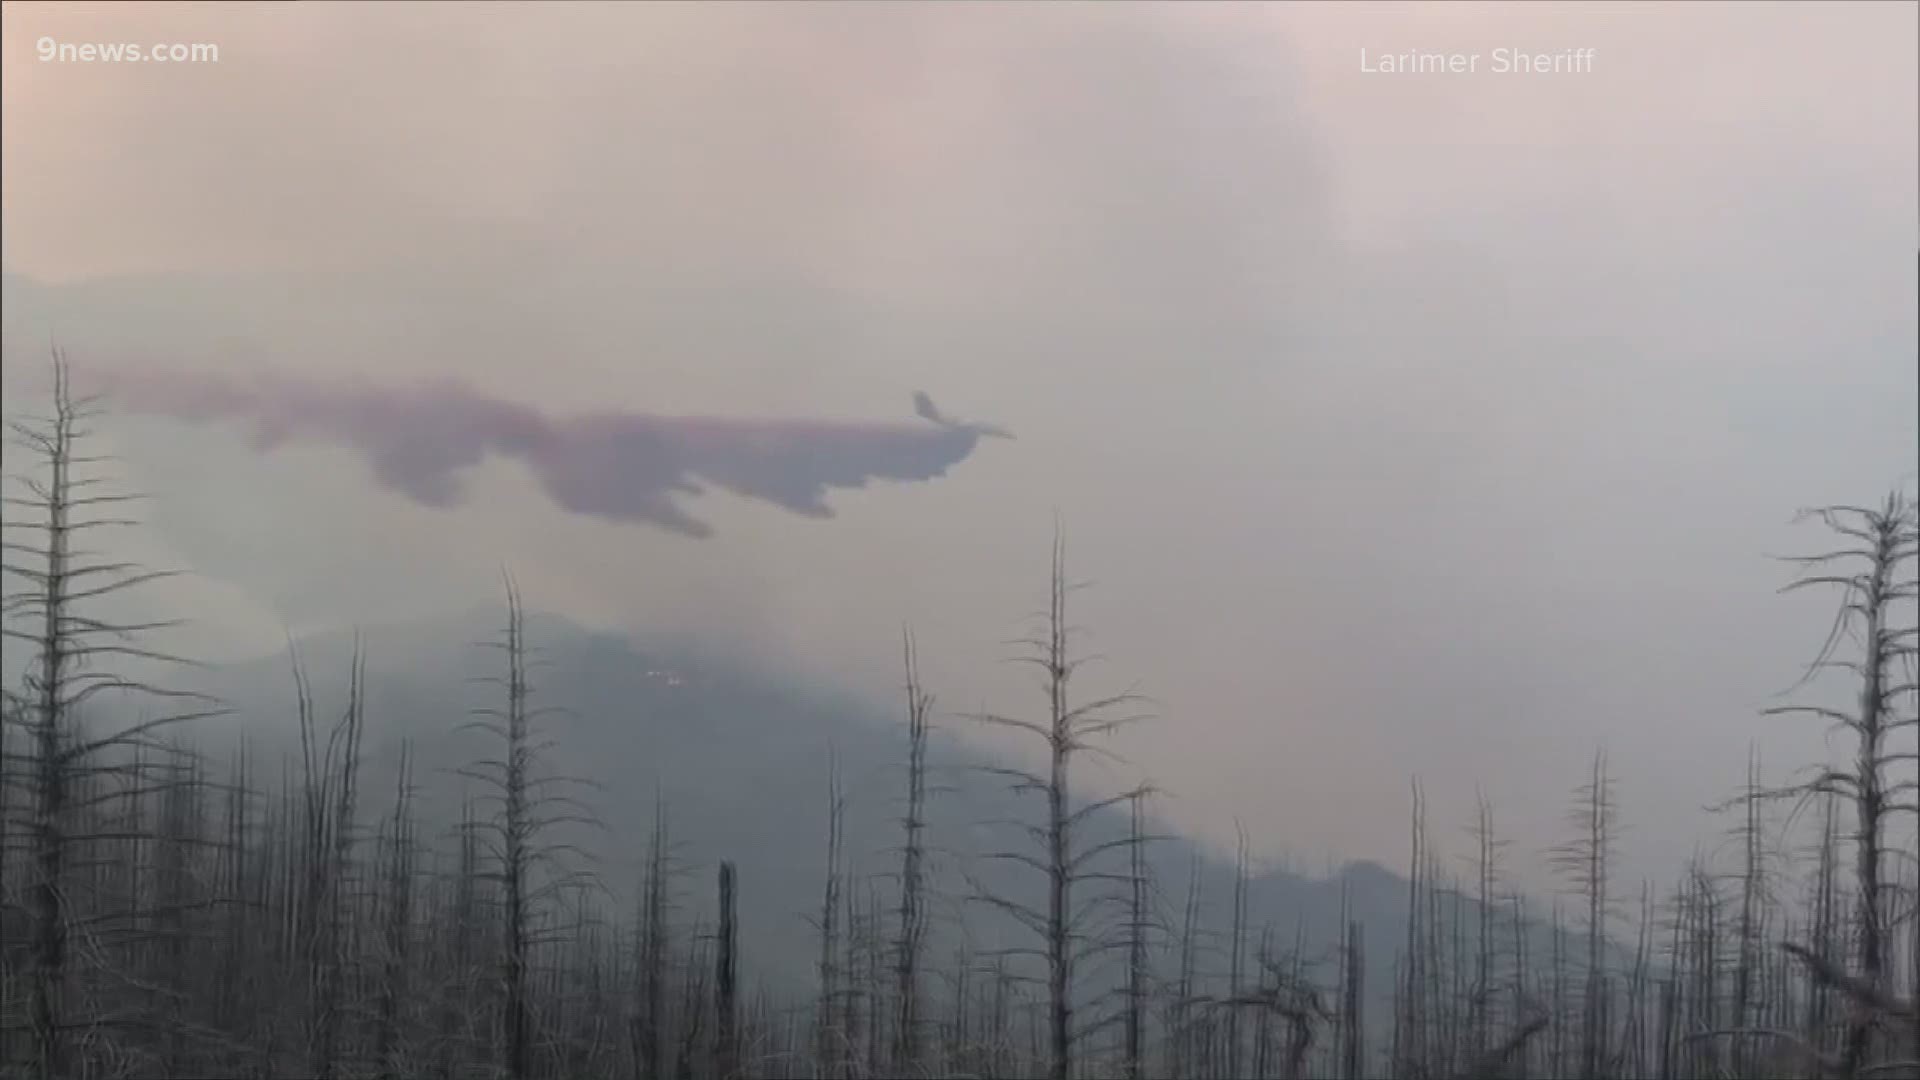 The Lewstone Fire was estimated at 165 acres on Sunday morning.